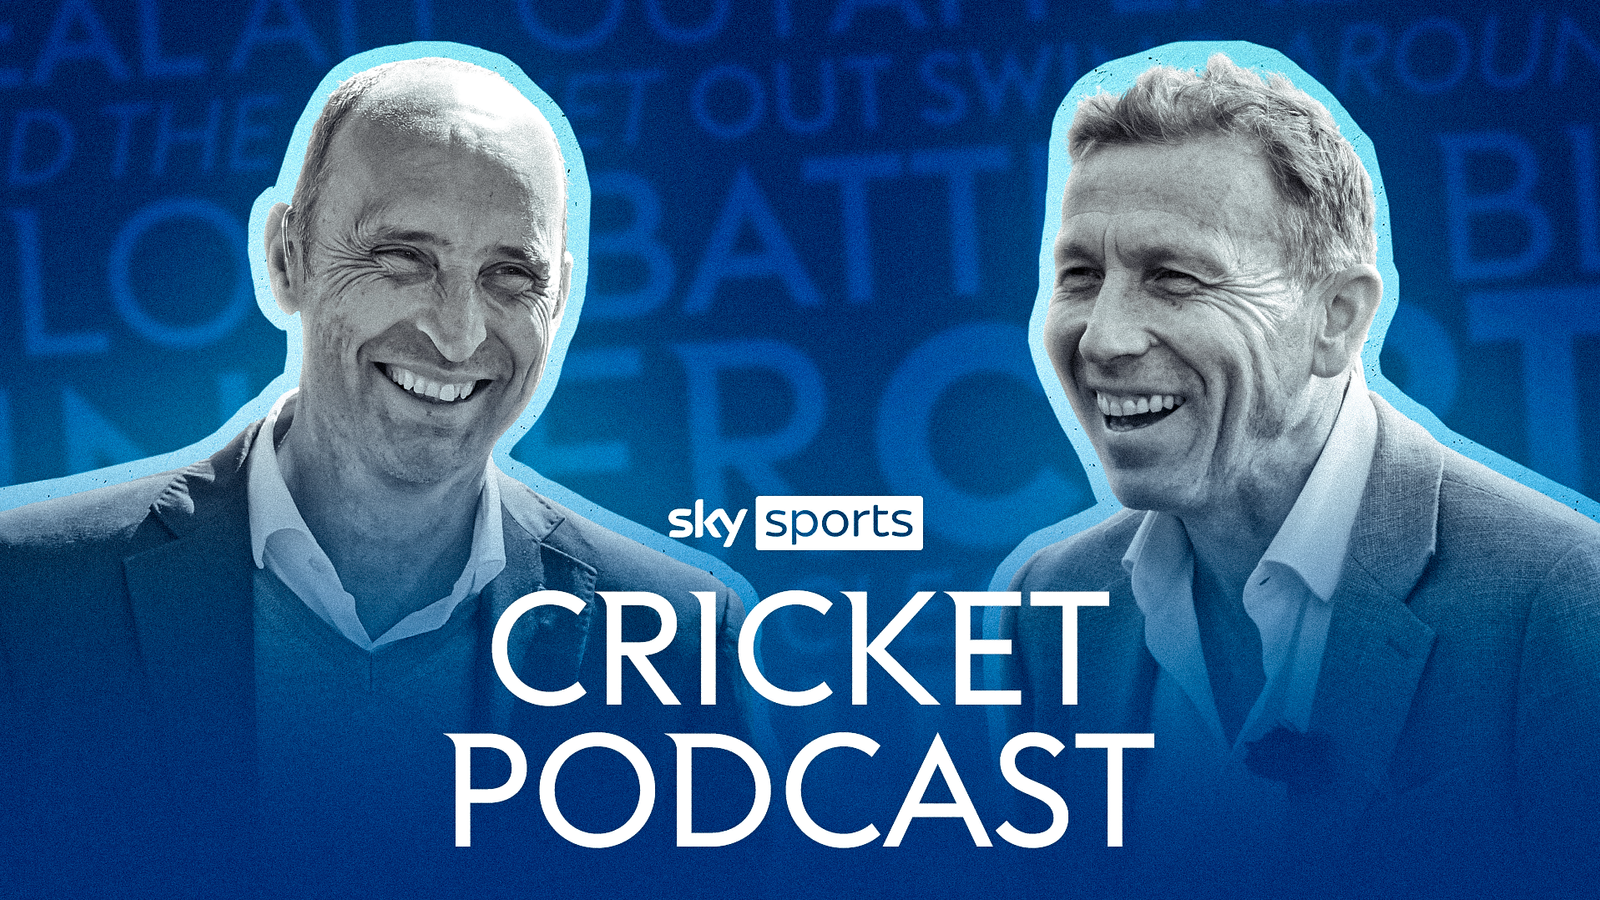 Sky Sports Cricket Podcast: Nasser Hussain and Michael Atherton | Cricket News